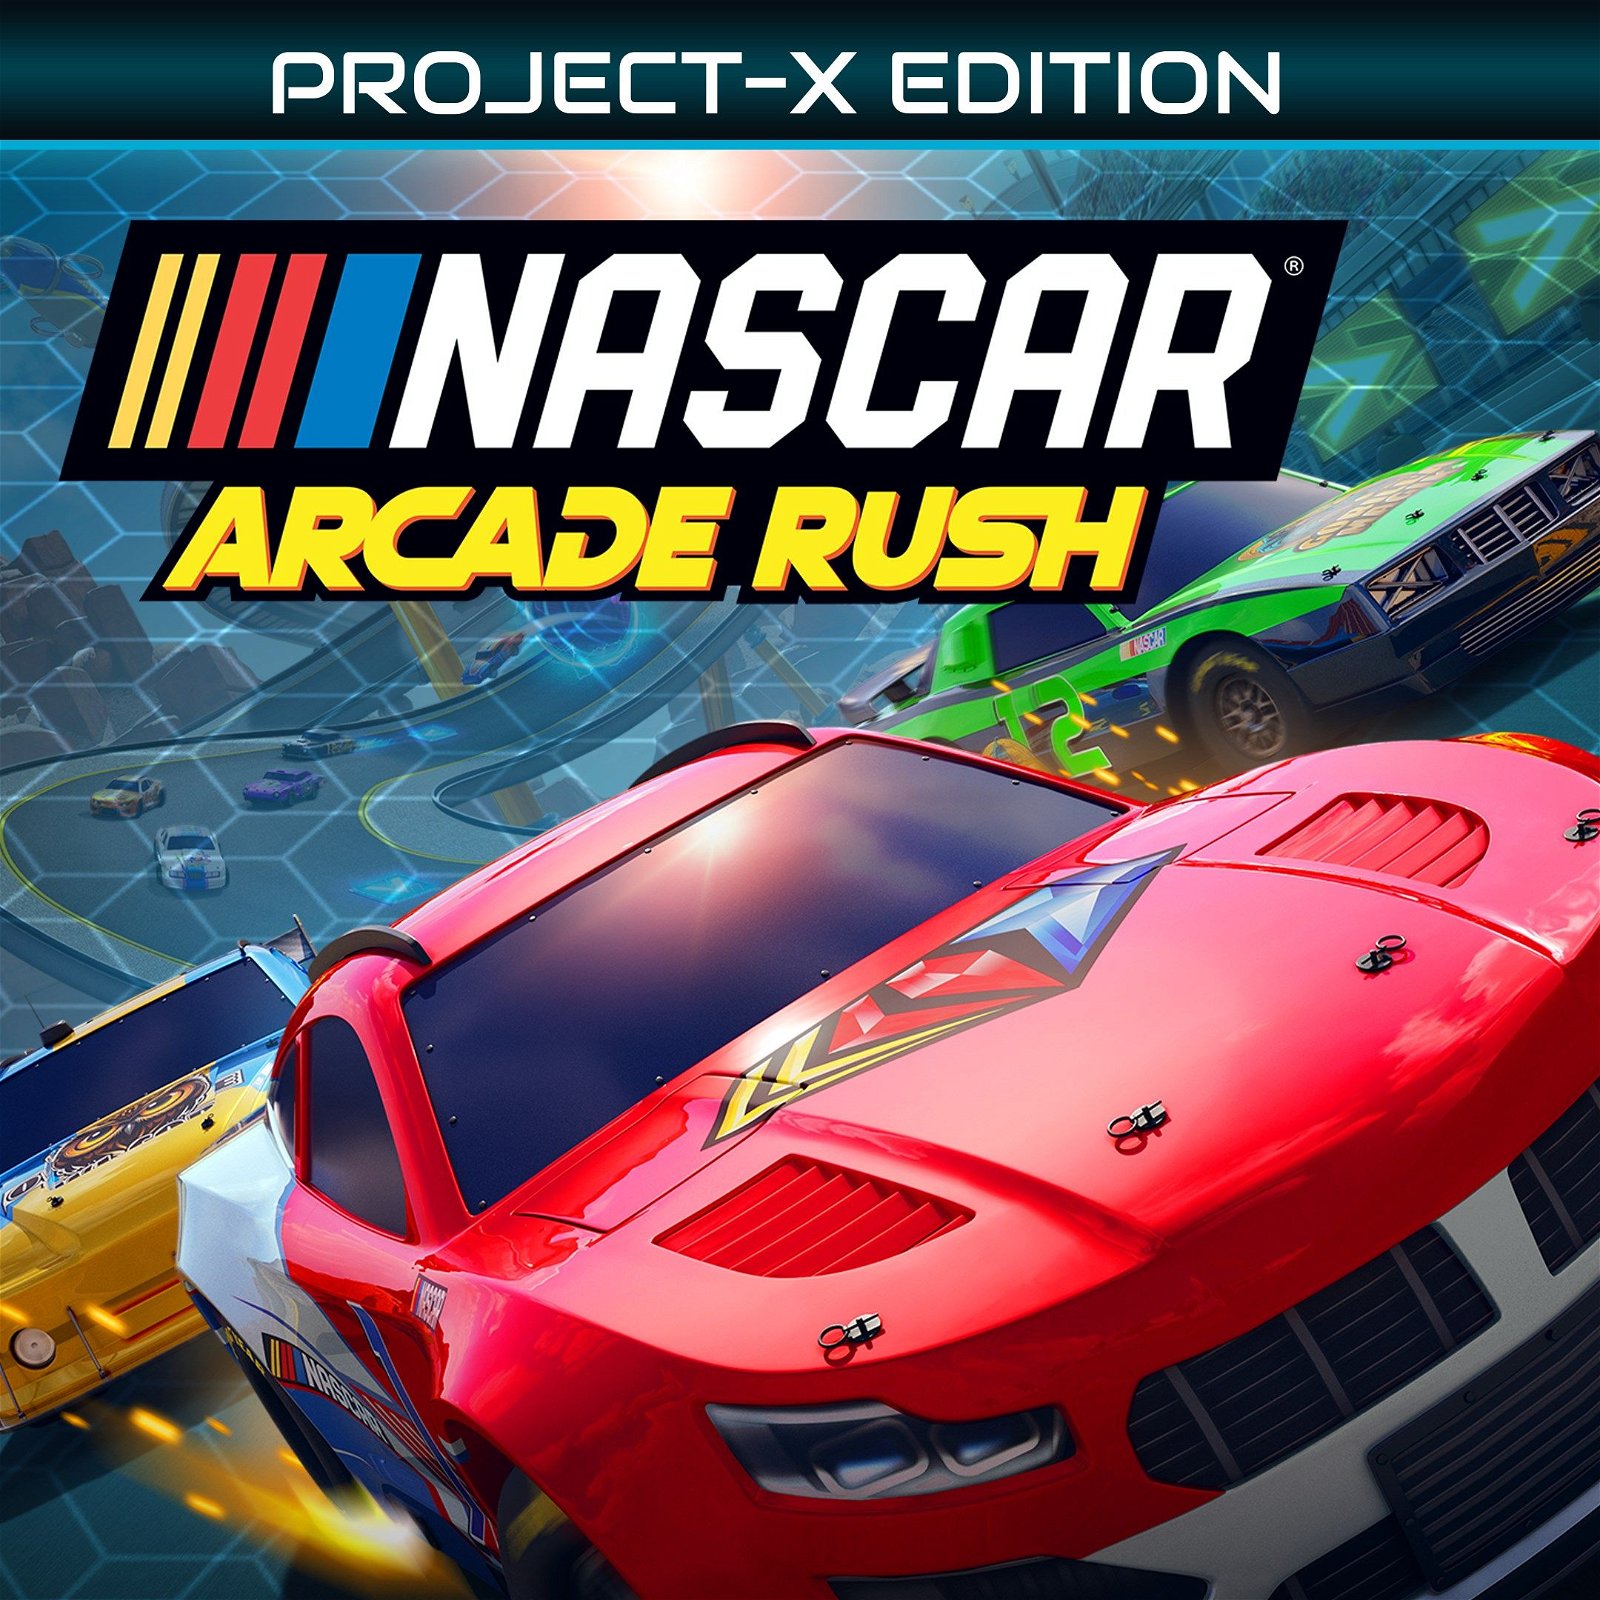 Image of NASCAR Arcade Rush Project-X Edition